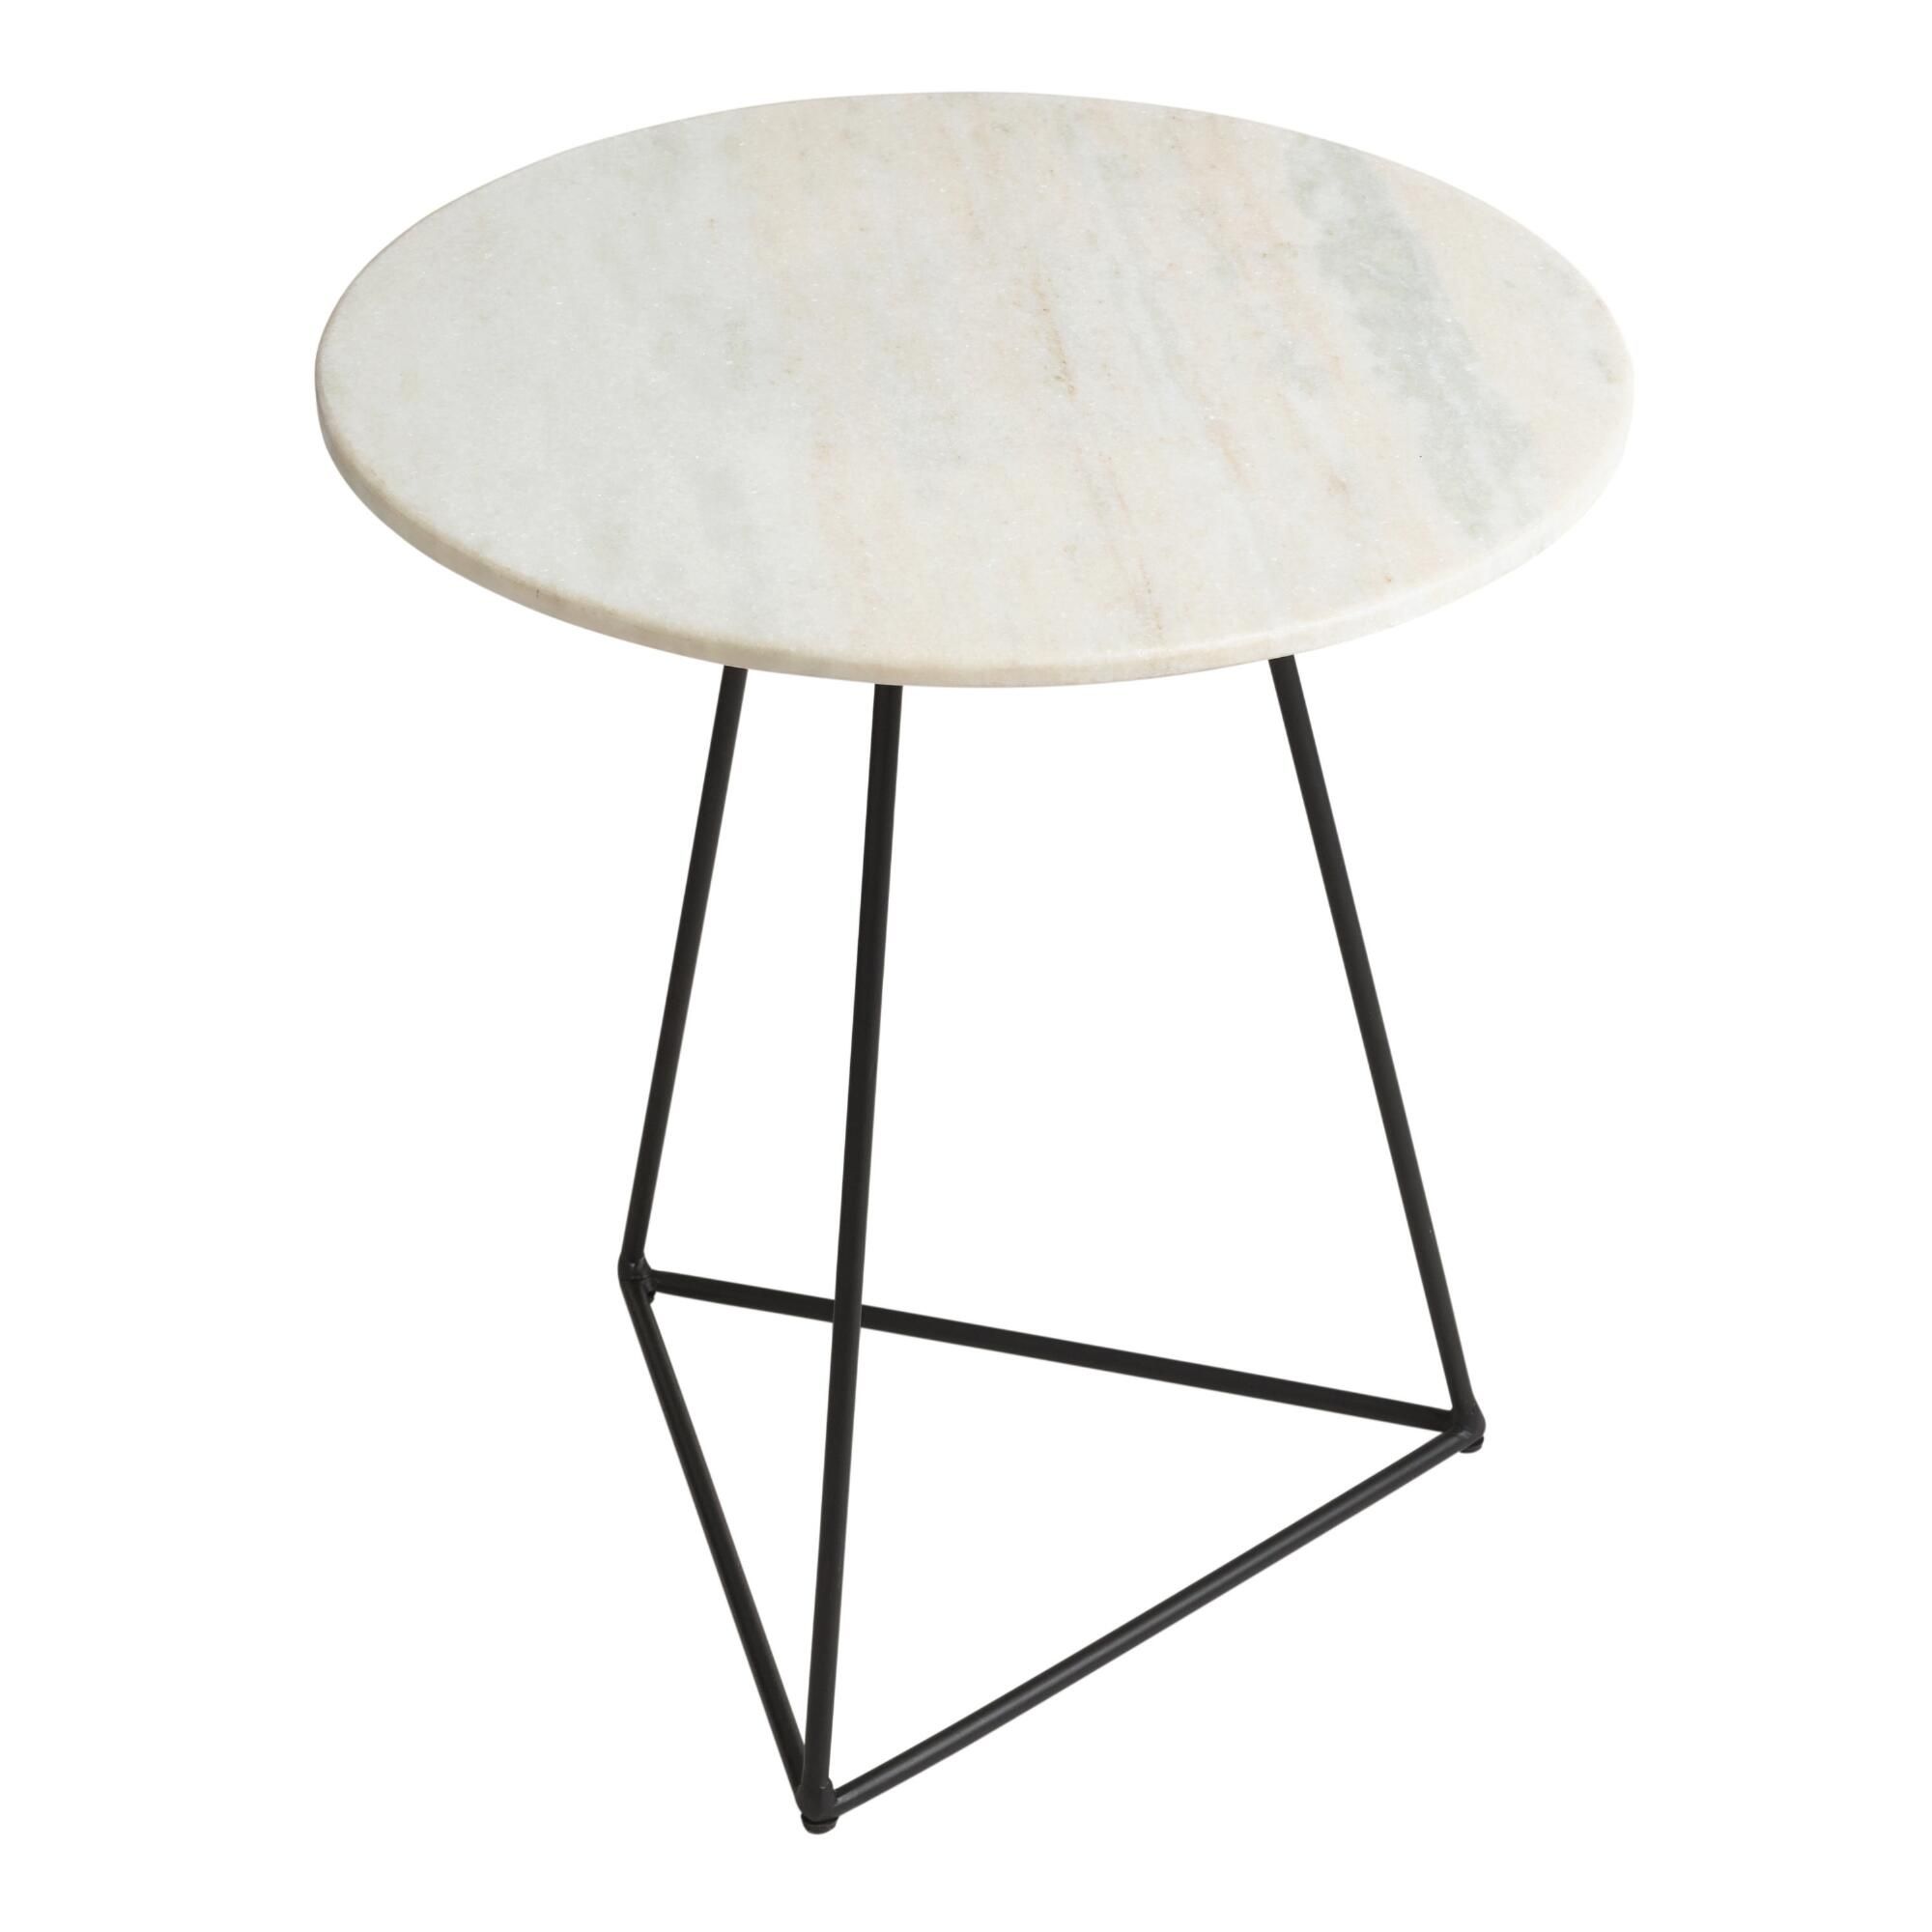 Round White Marble And Black Metal Accent Table